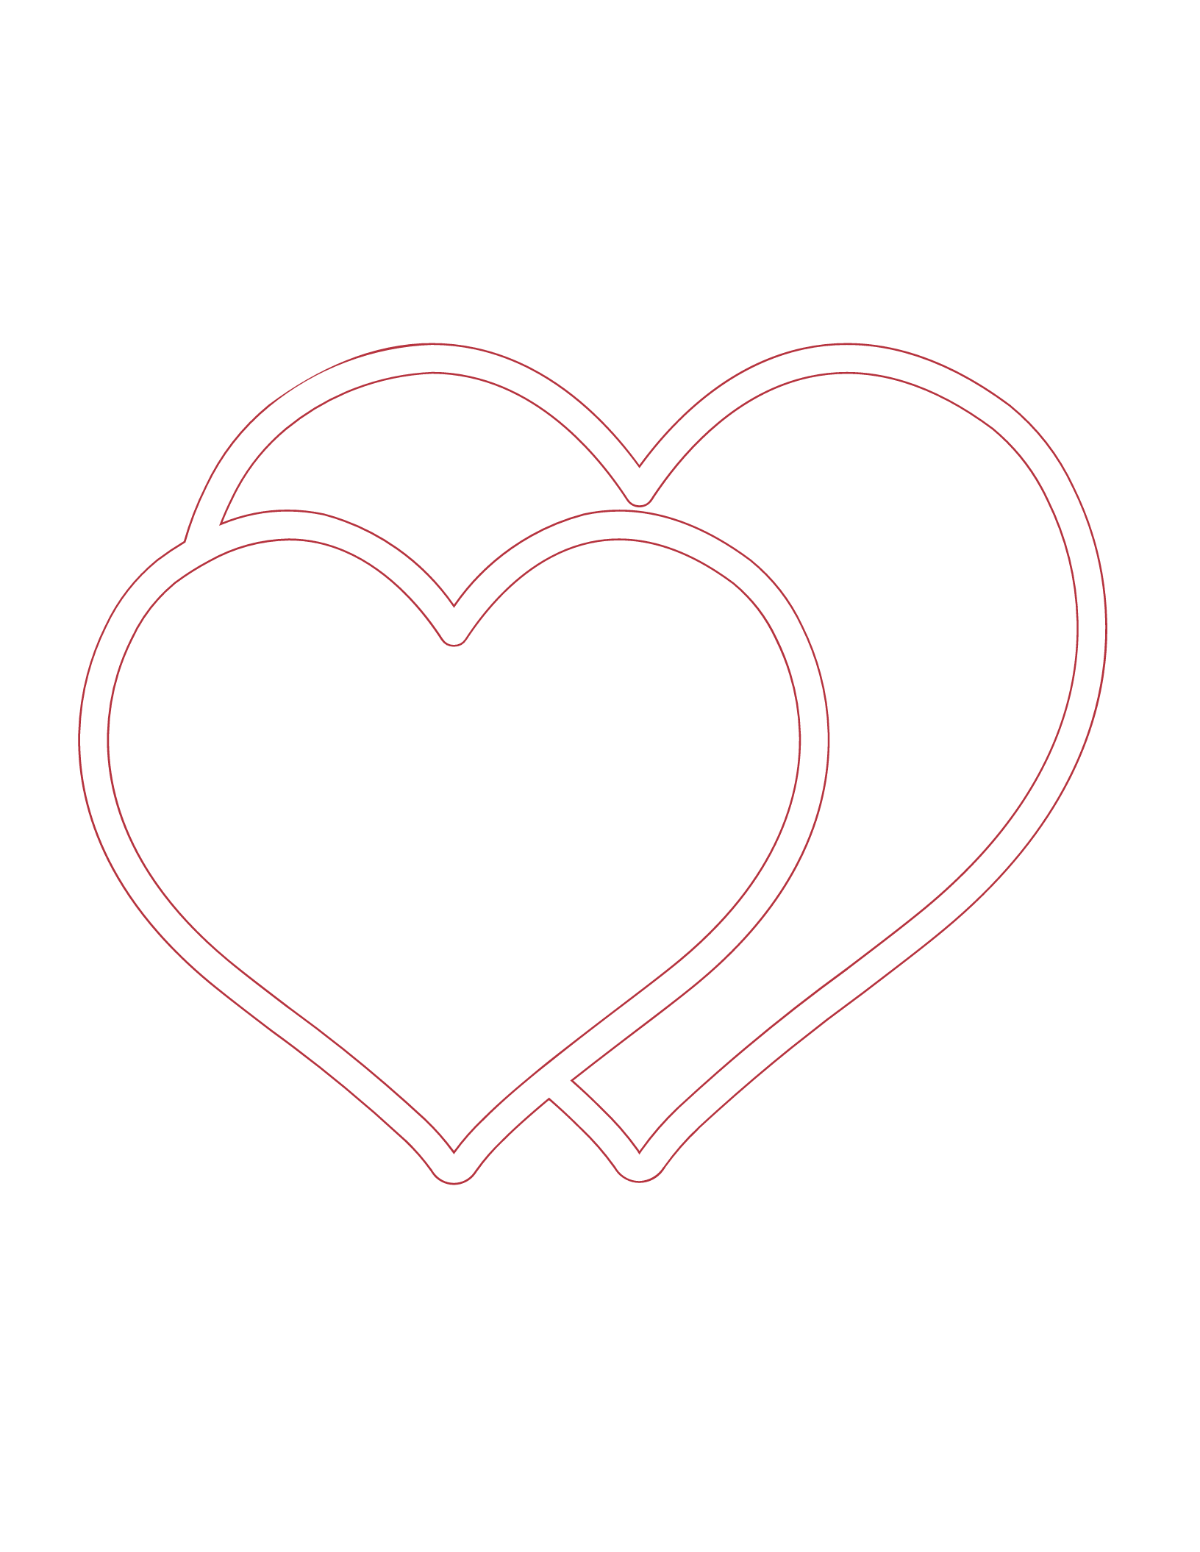 Red Heart Outline Coloring Page Template